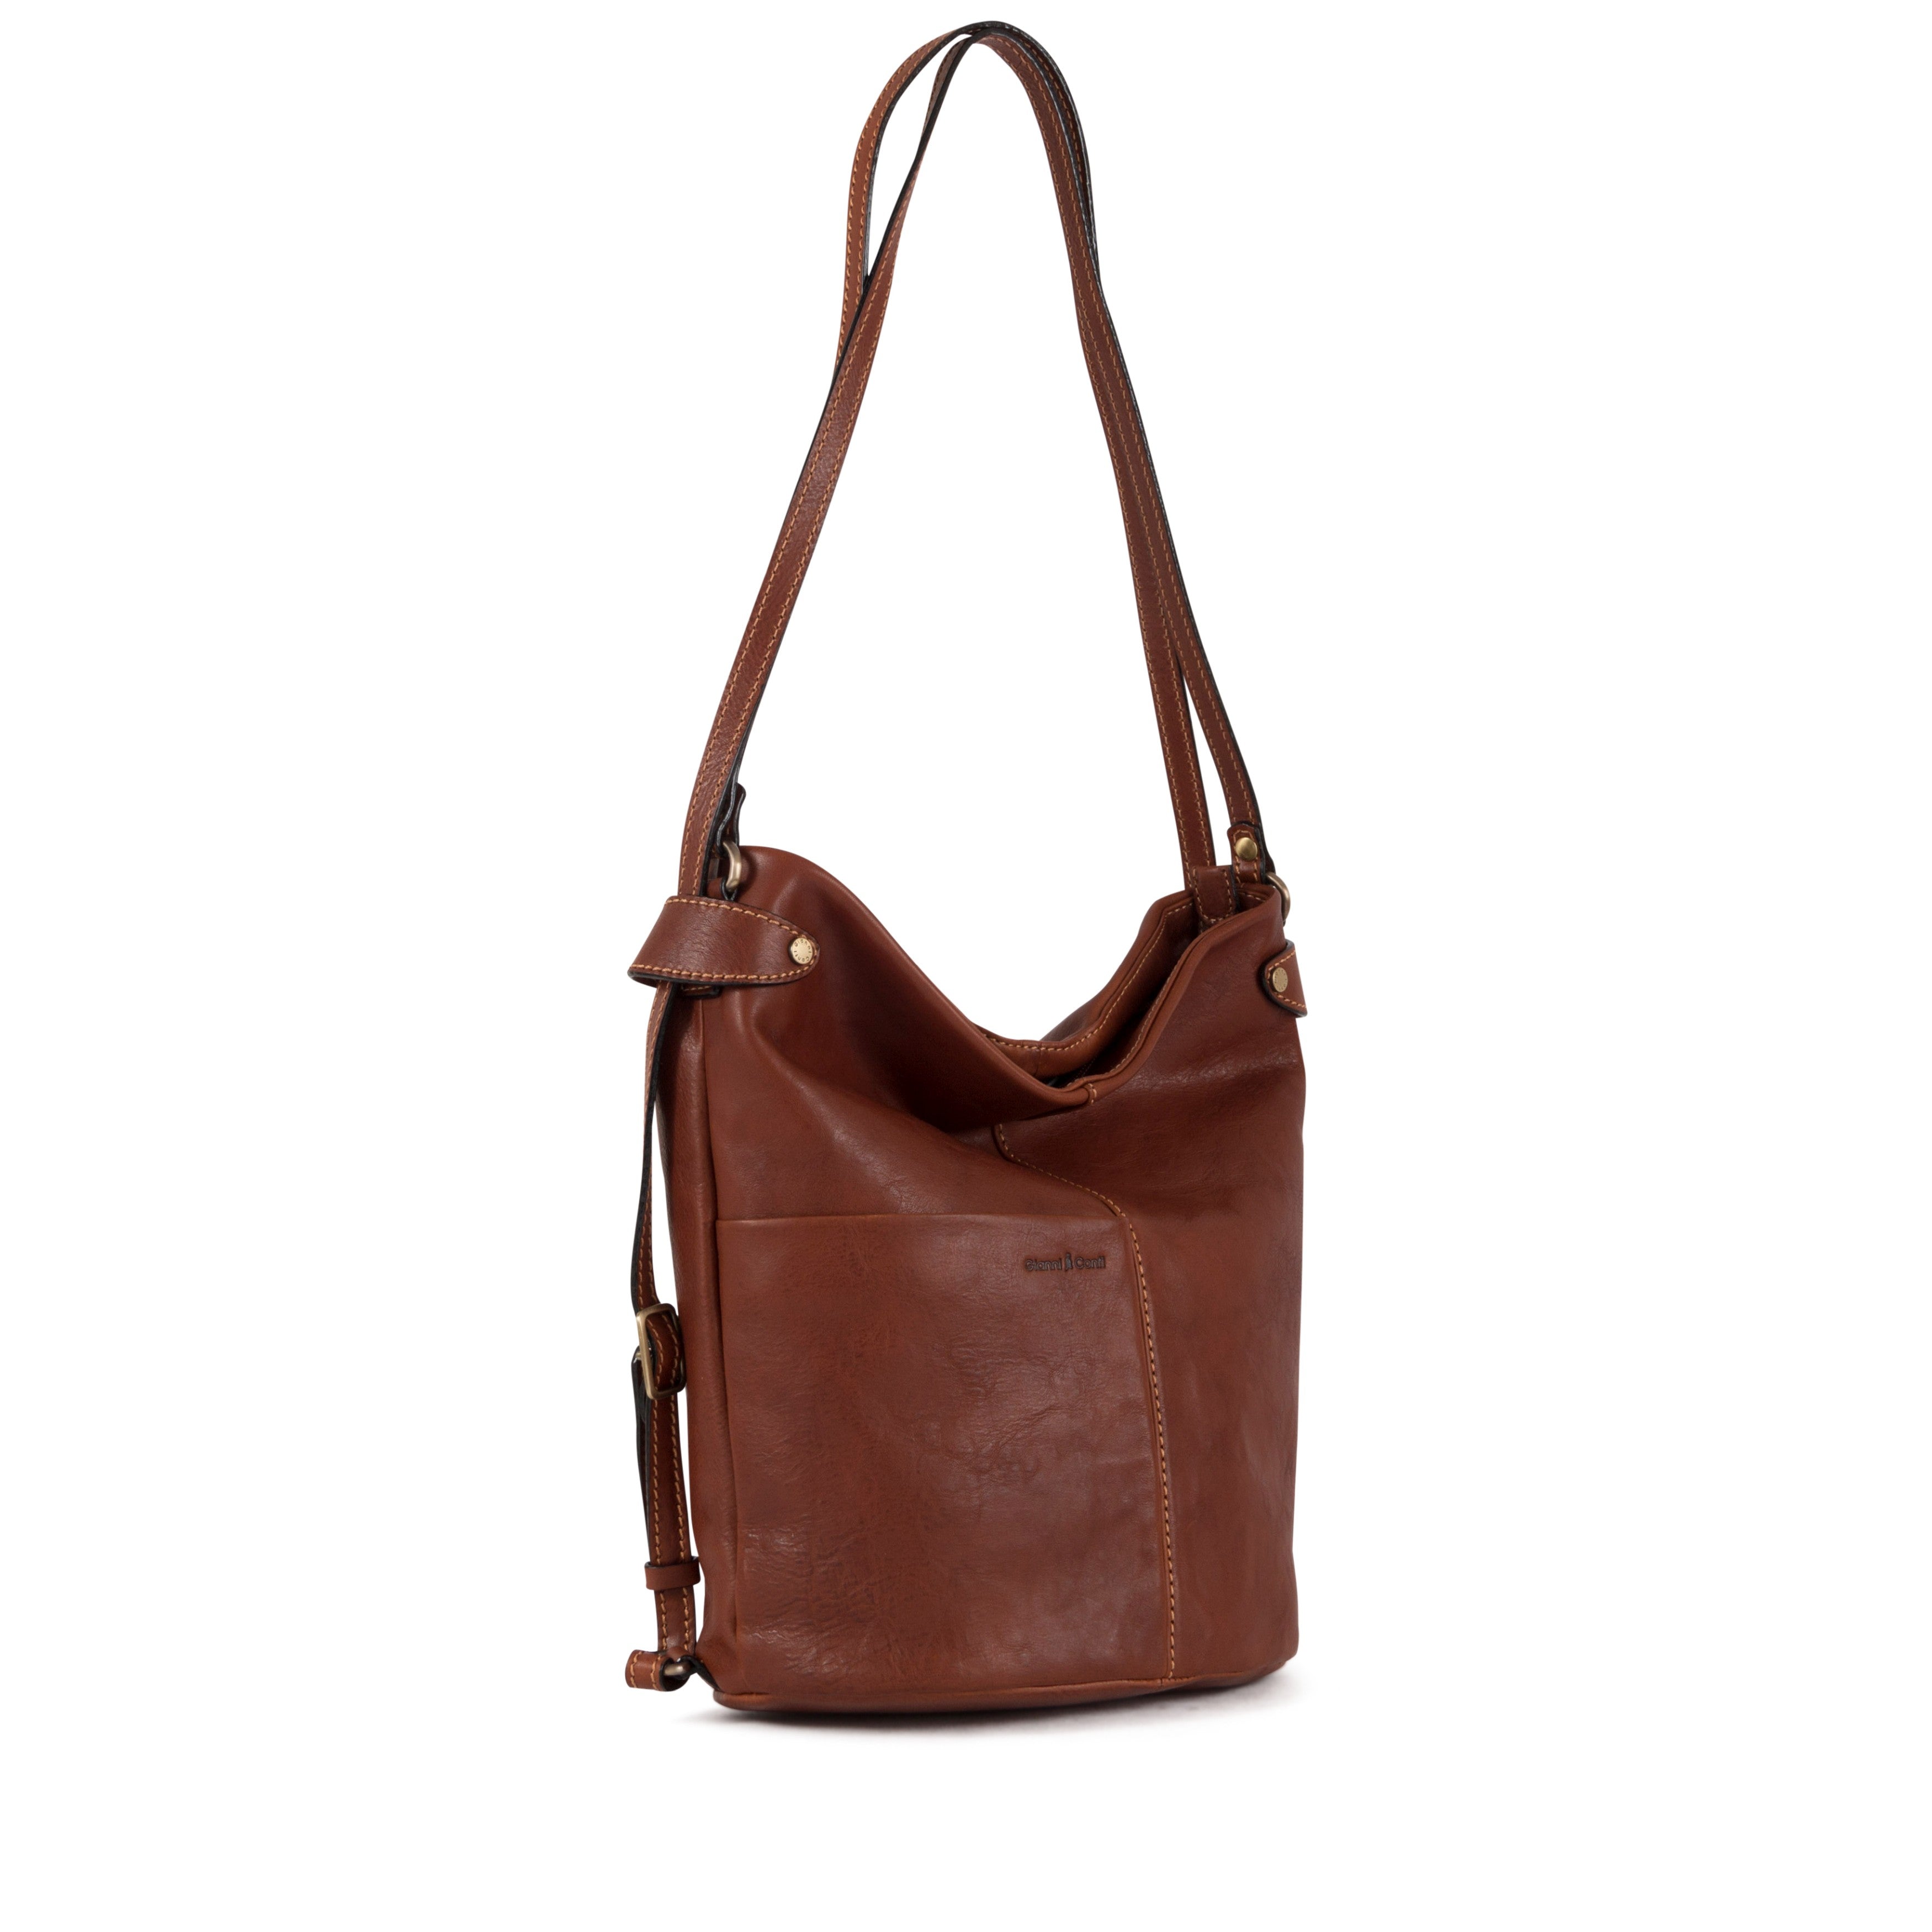 FLAVIA Convertible Leather Shoulder Bag by Gianni Conti